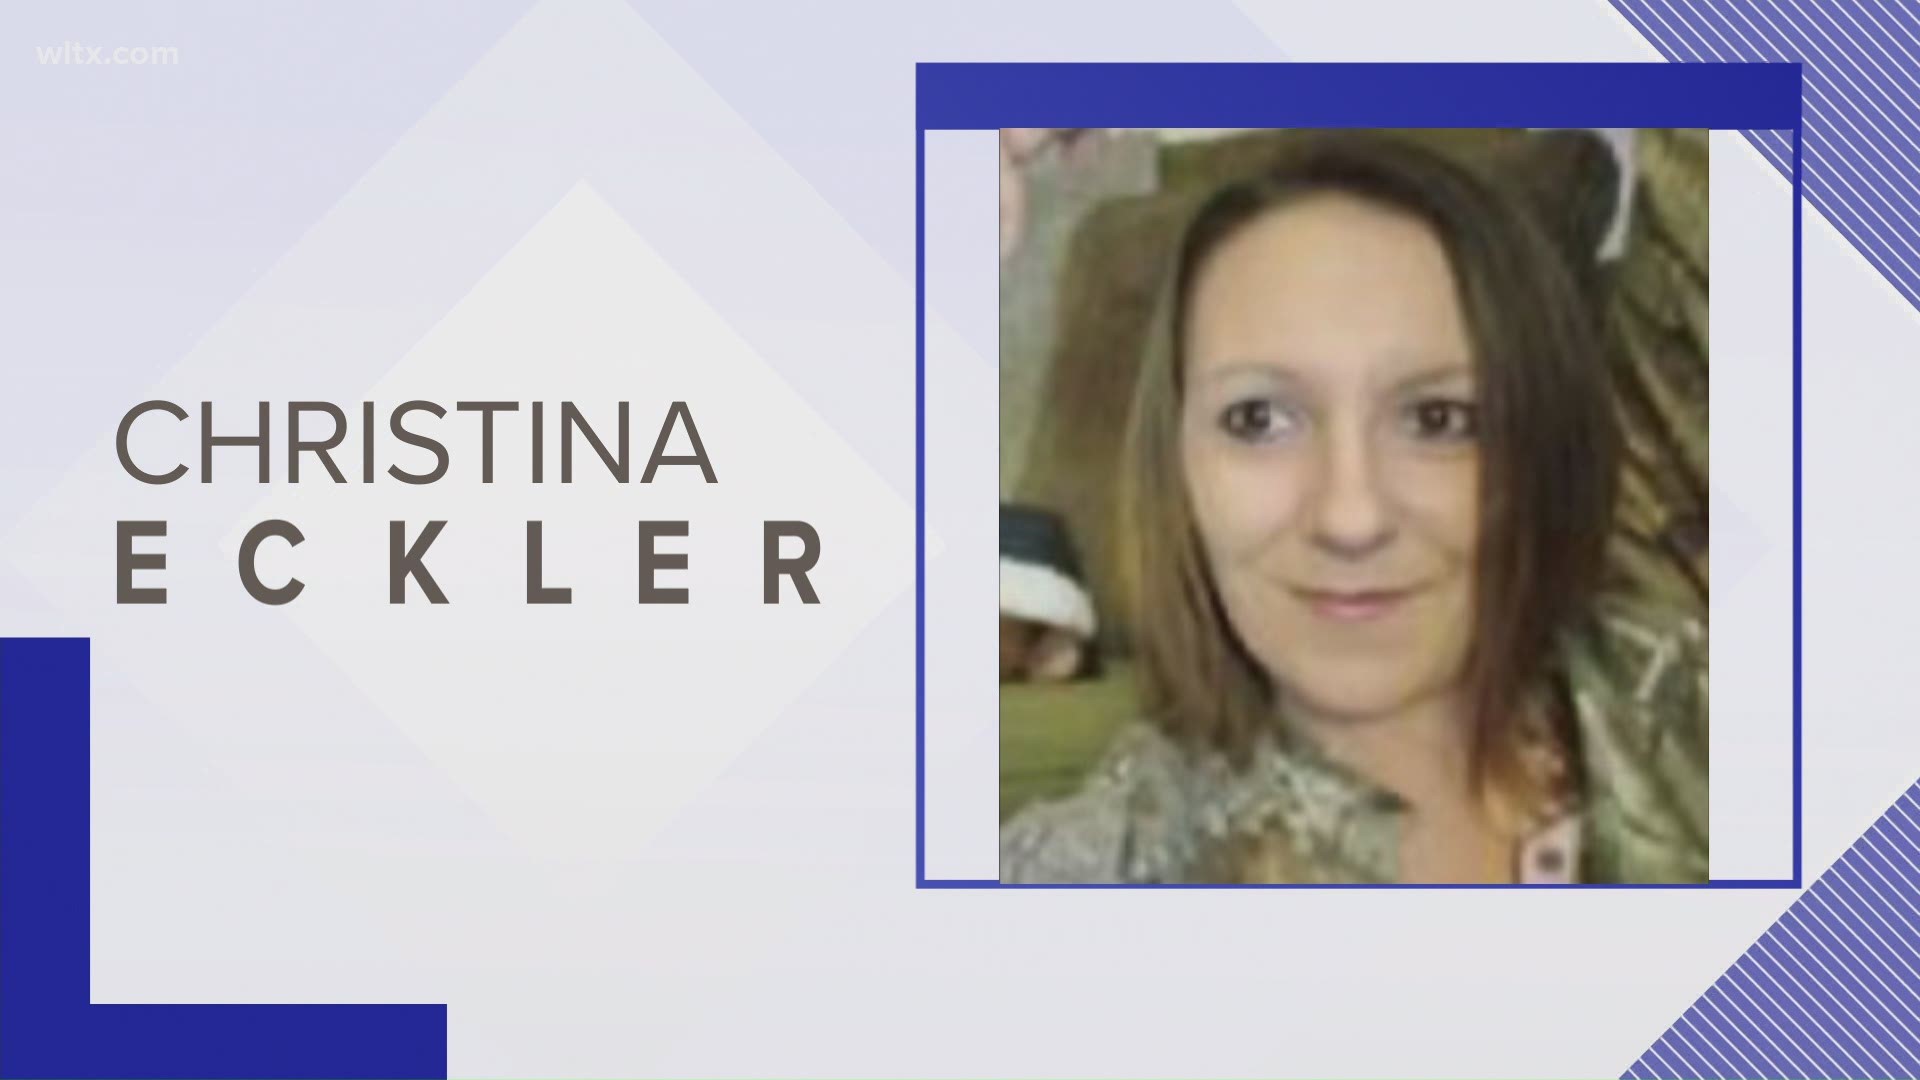 Christina Marie Eckler has been reported missing by her family